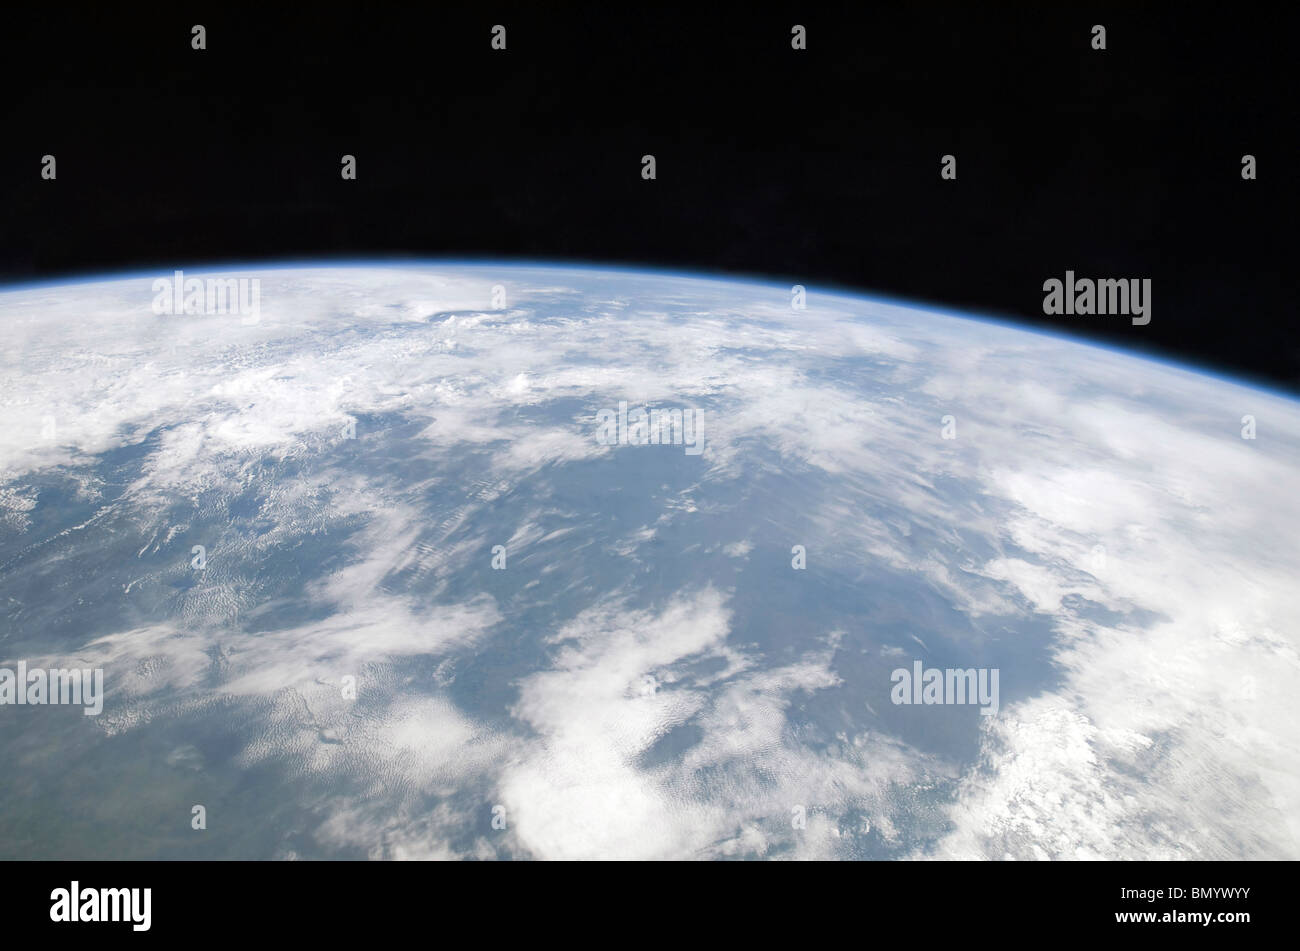 February 20, 2010 - View of planet Earth from space. Stock Photo